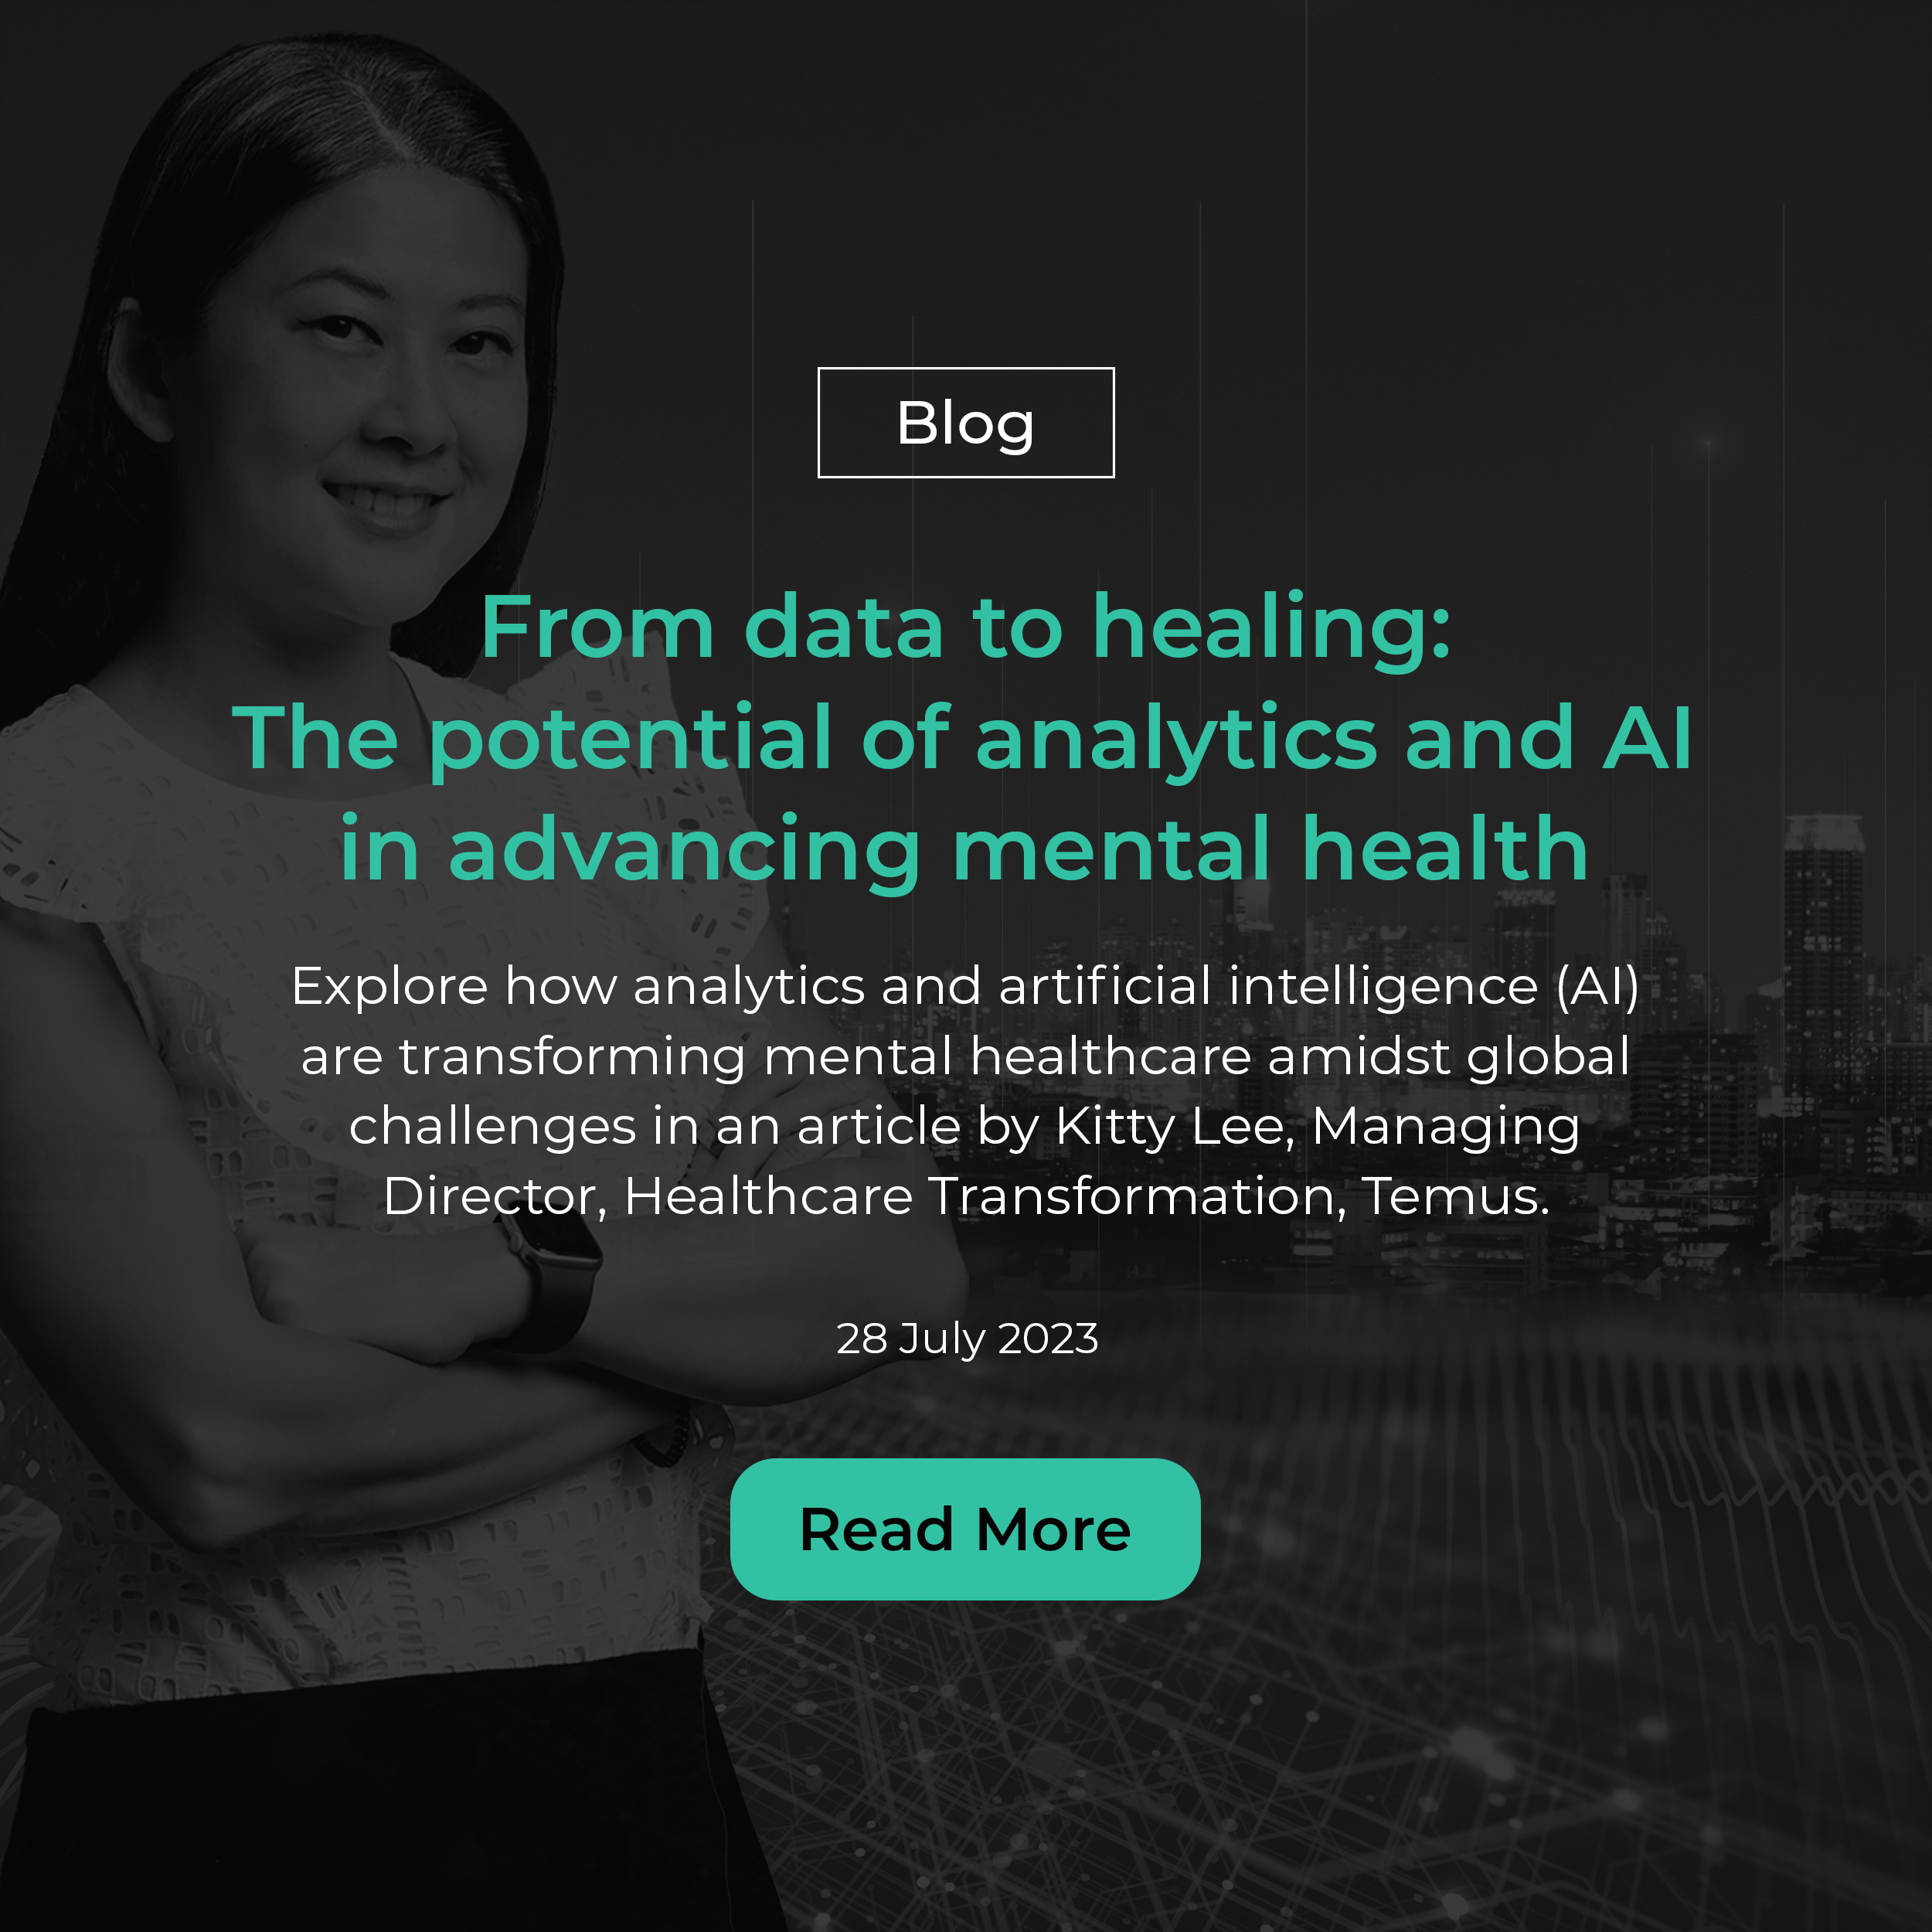 From data to healing: The potential of analytics and AI in advancing mental health